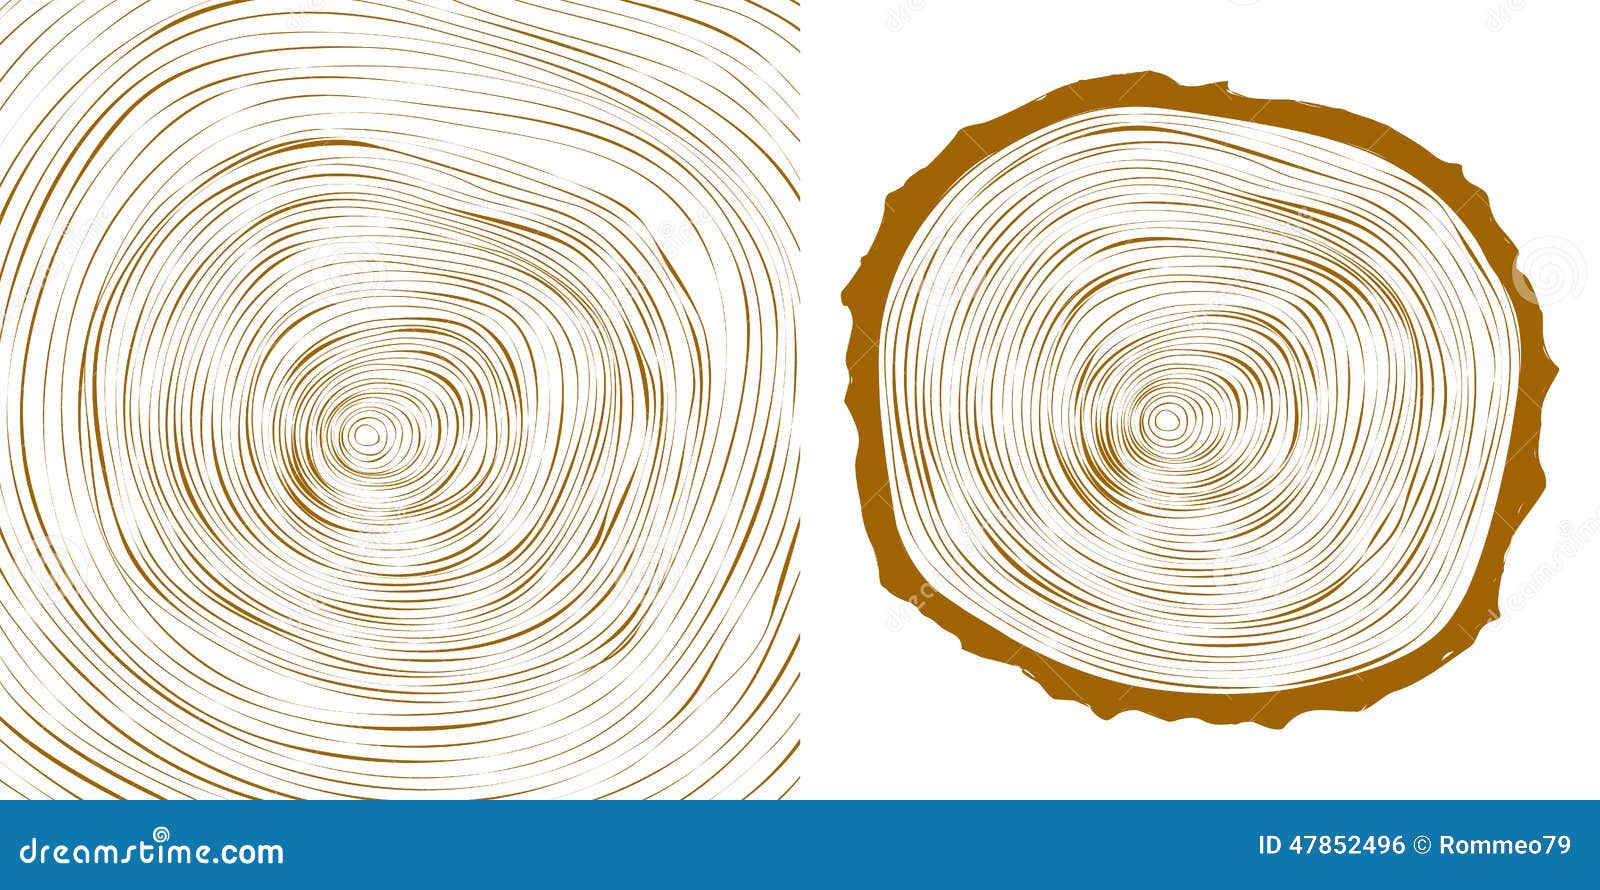 Annual tree growth rings with brown tones drawing of the cross-section of a tree  trunk - SuperStock